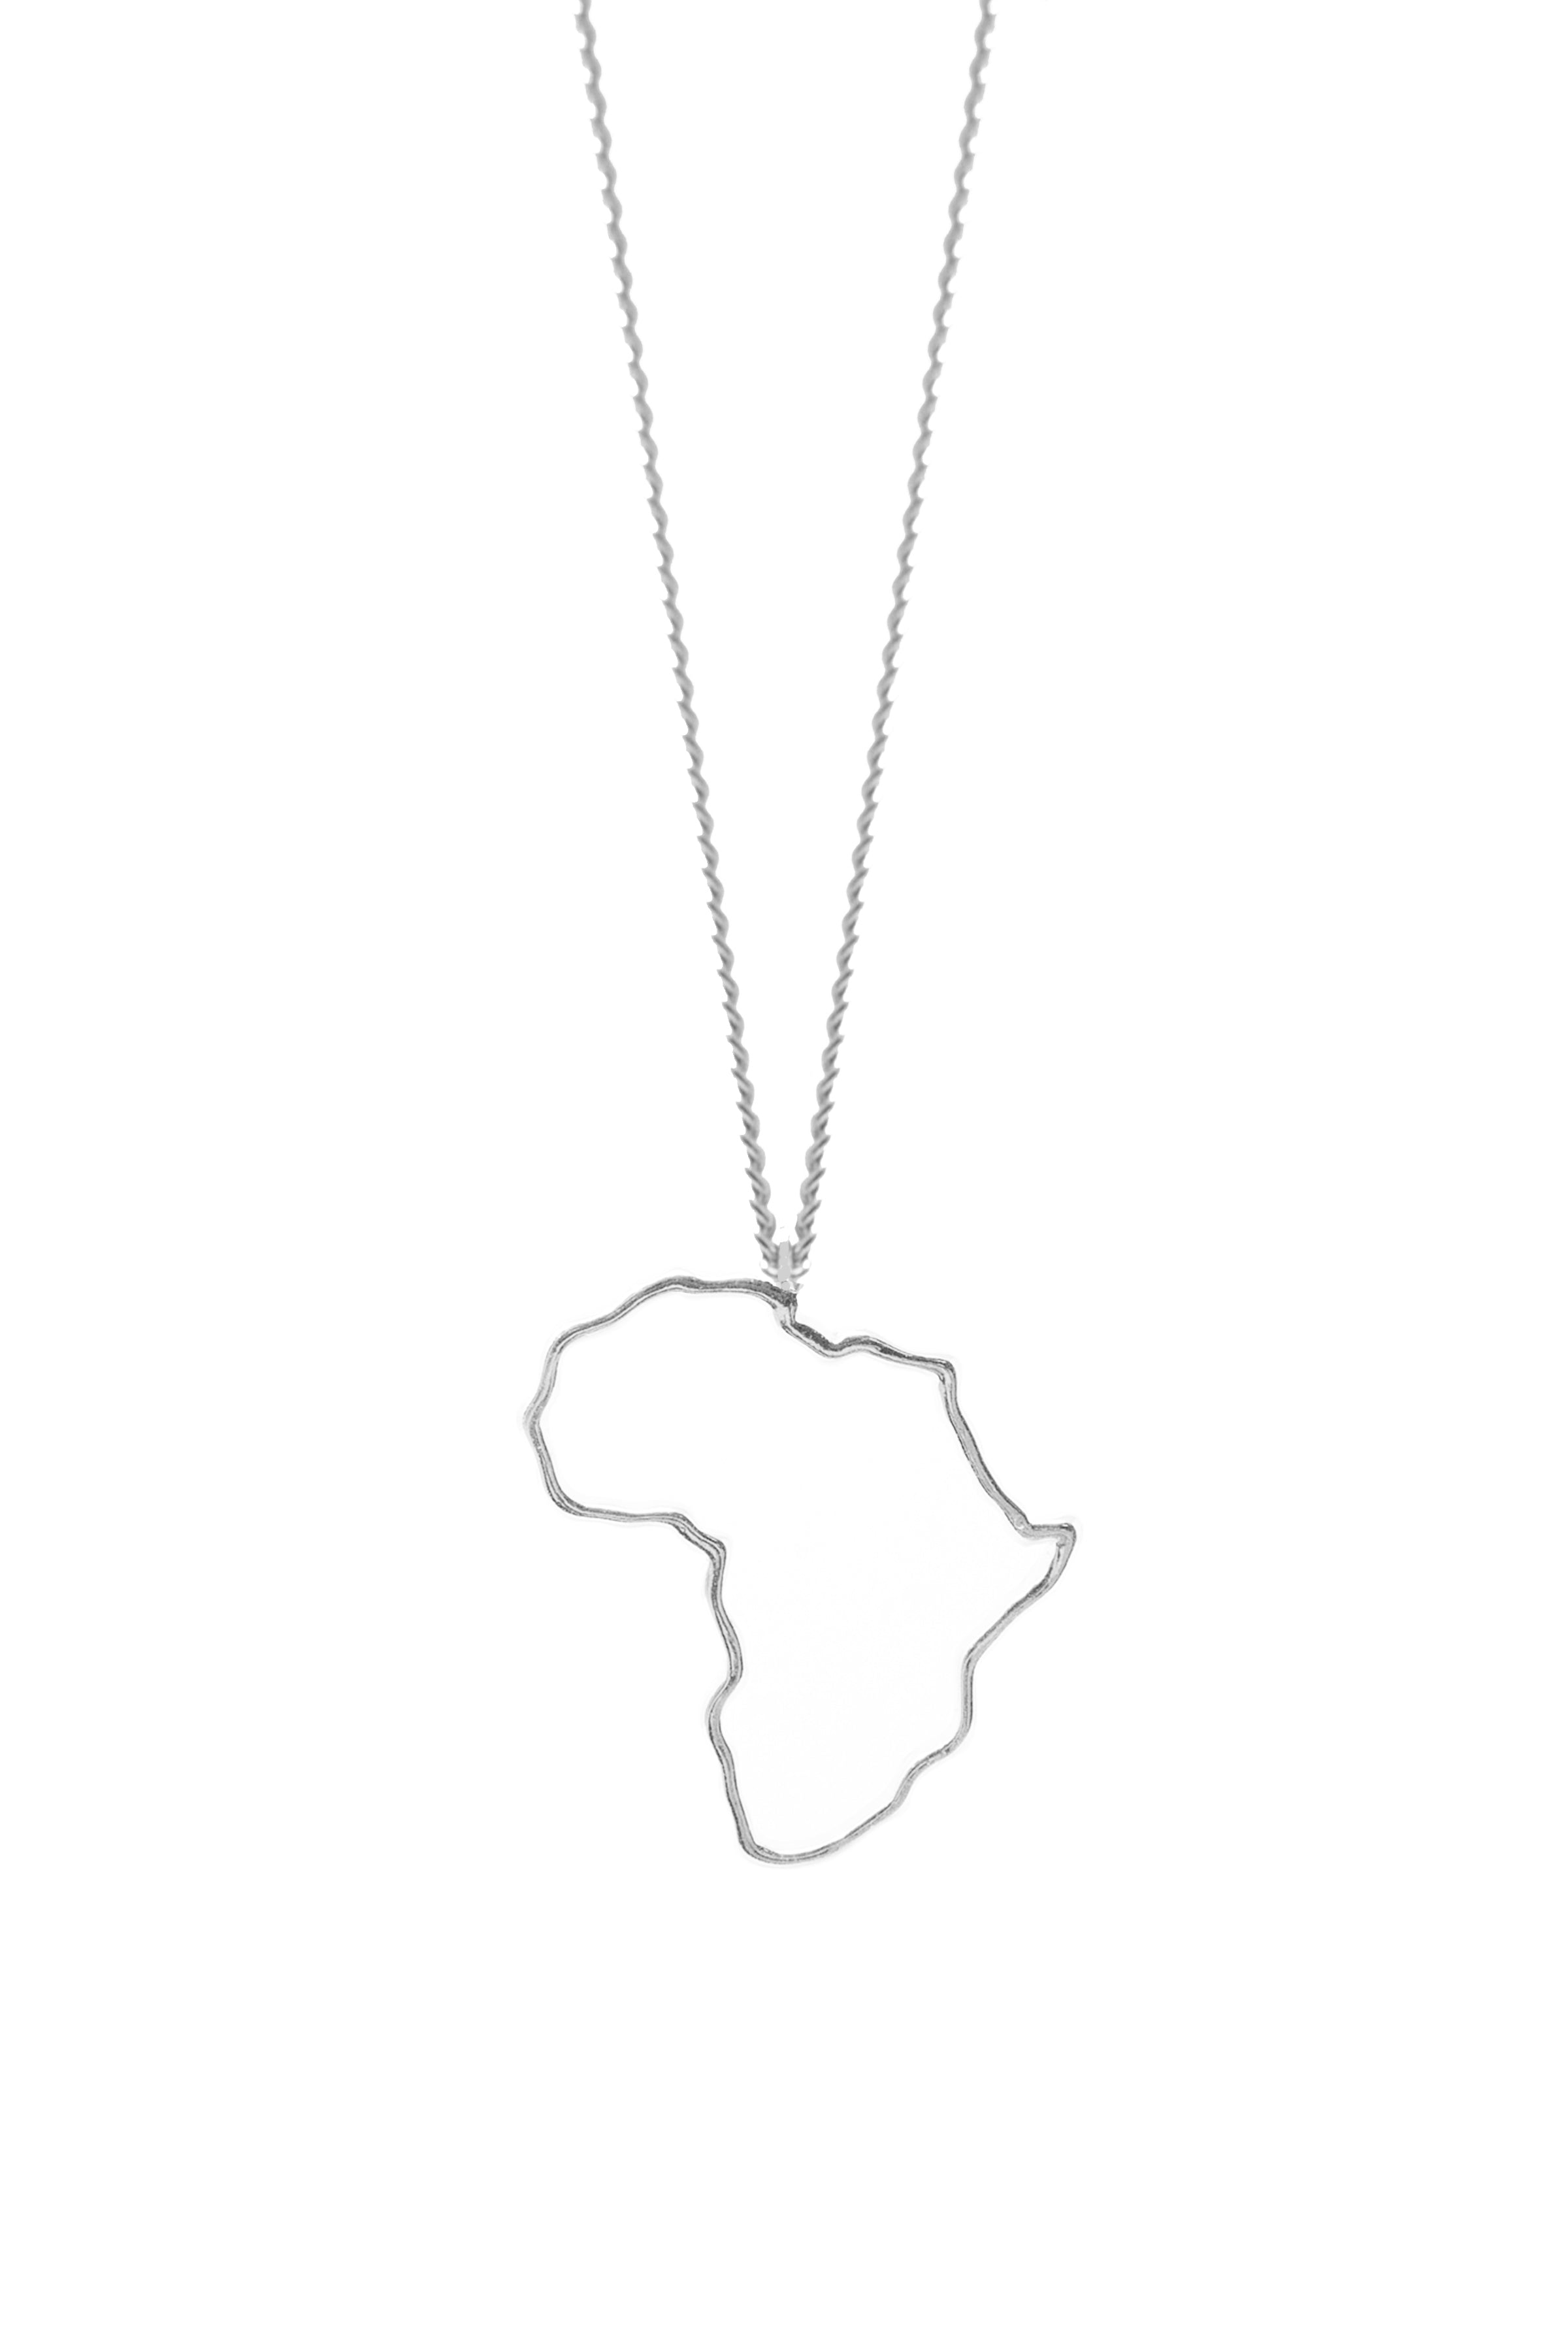 THE AFRICA Necklace